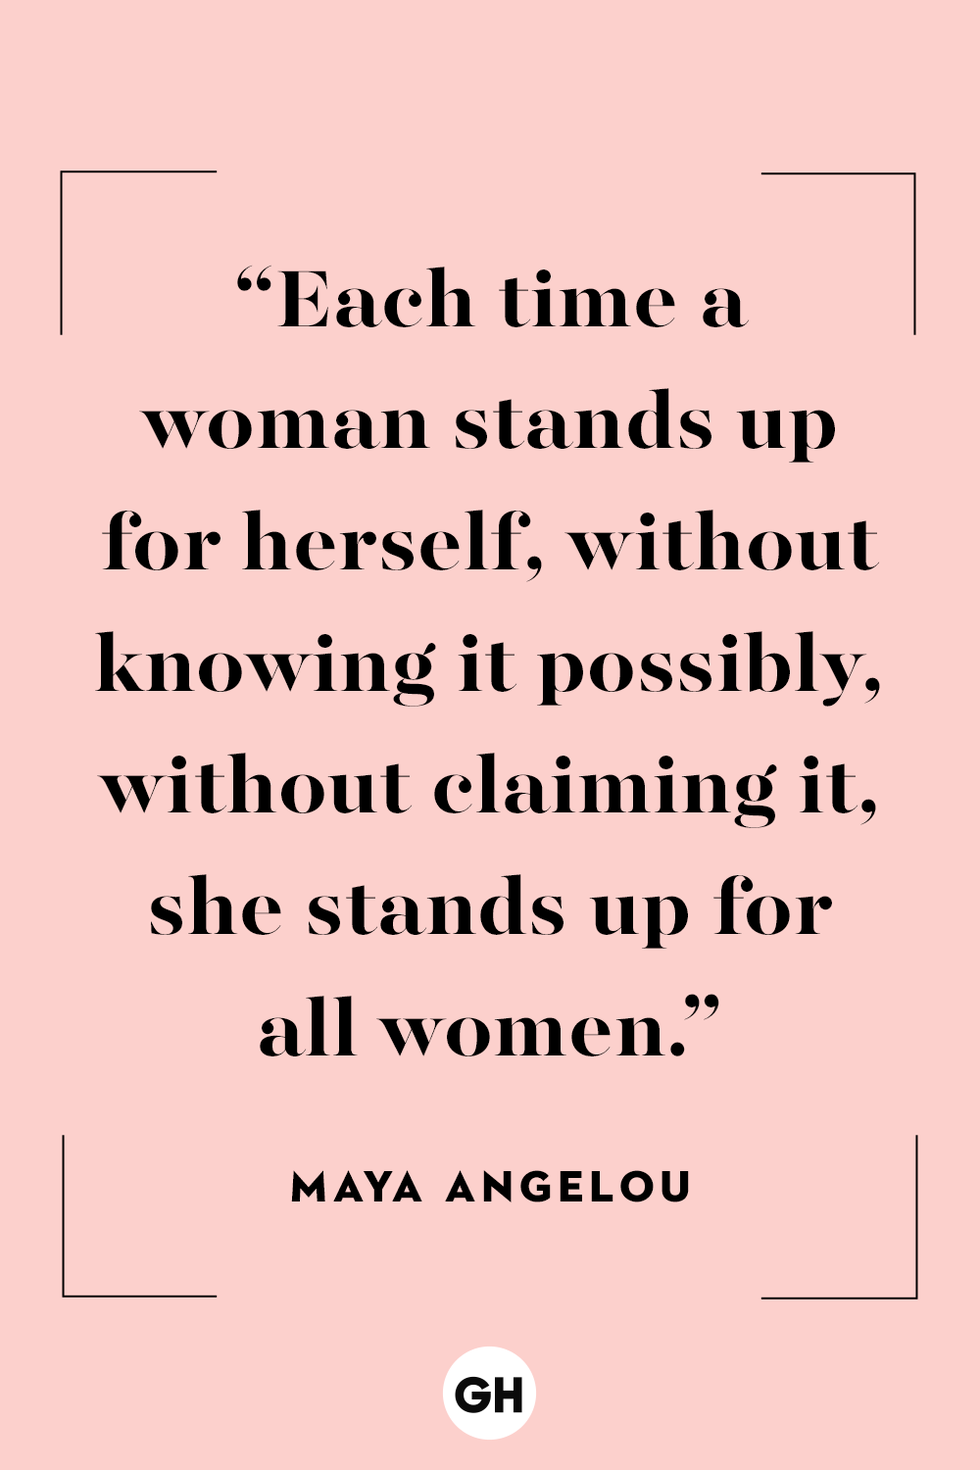 feminist-quotes-maya-angelou-1564070487 – cup of tea with that book, please